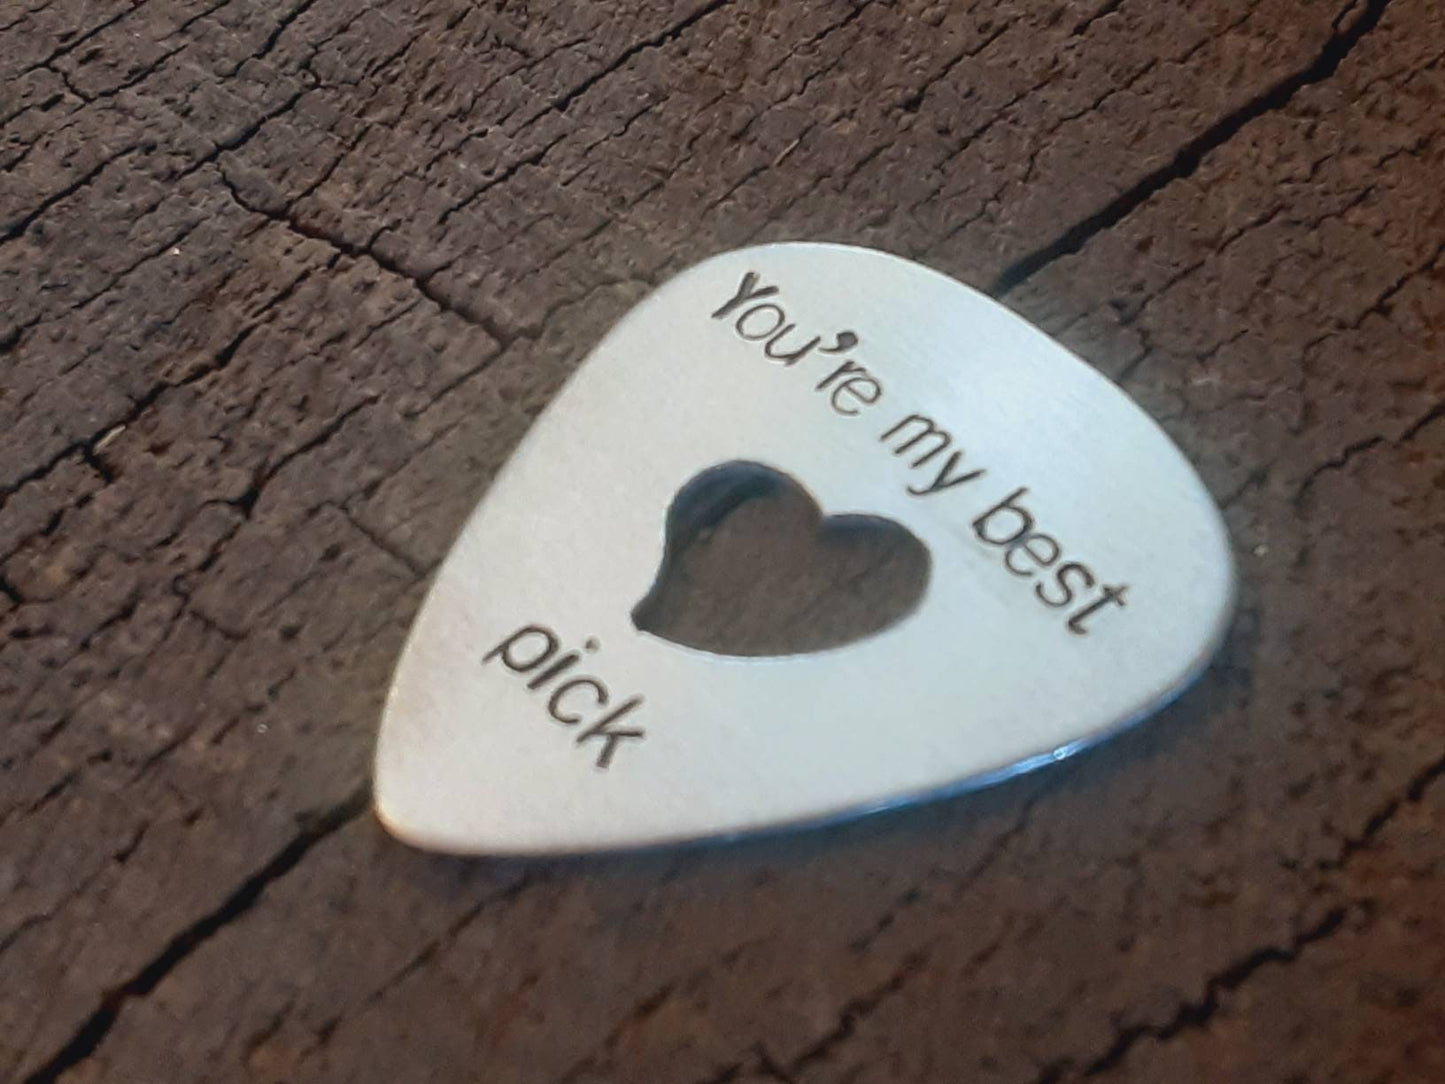 Playable aluminum guitar pick with heart cut out to improve grip